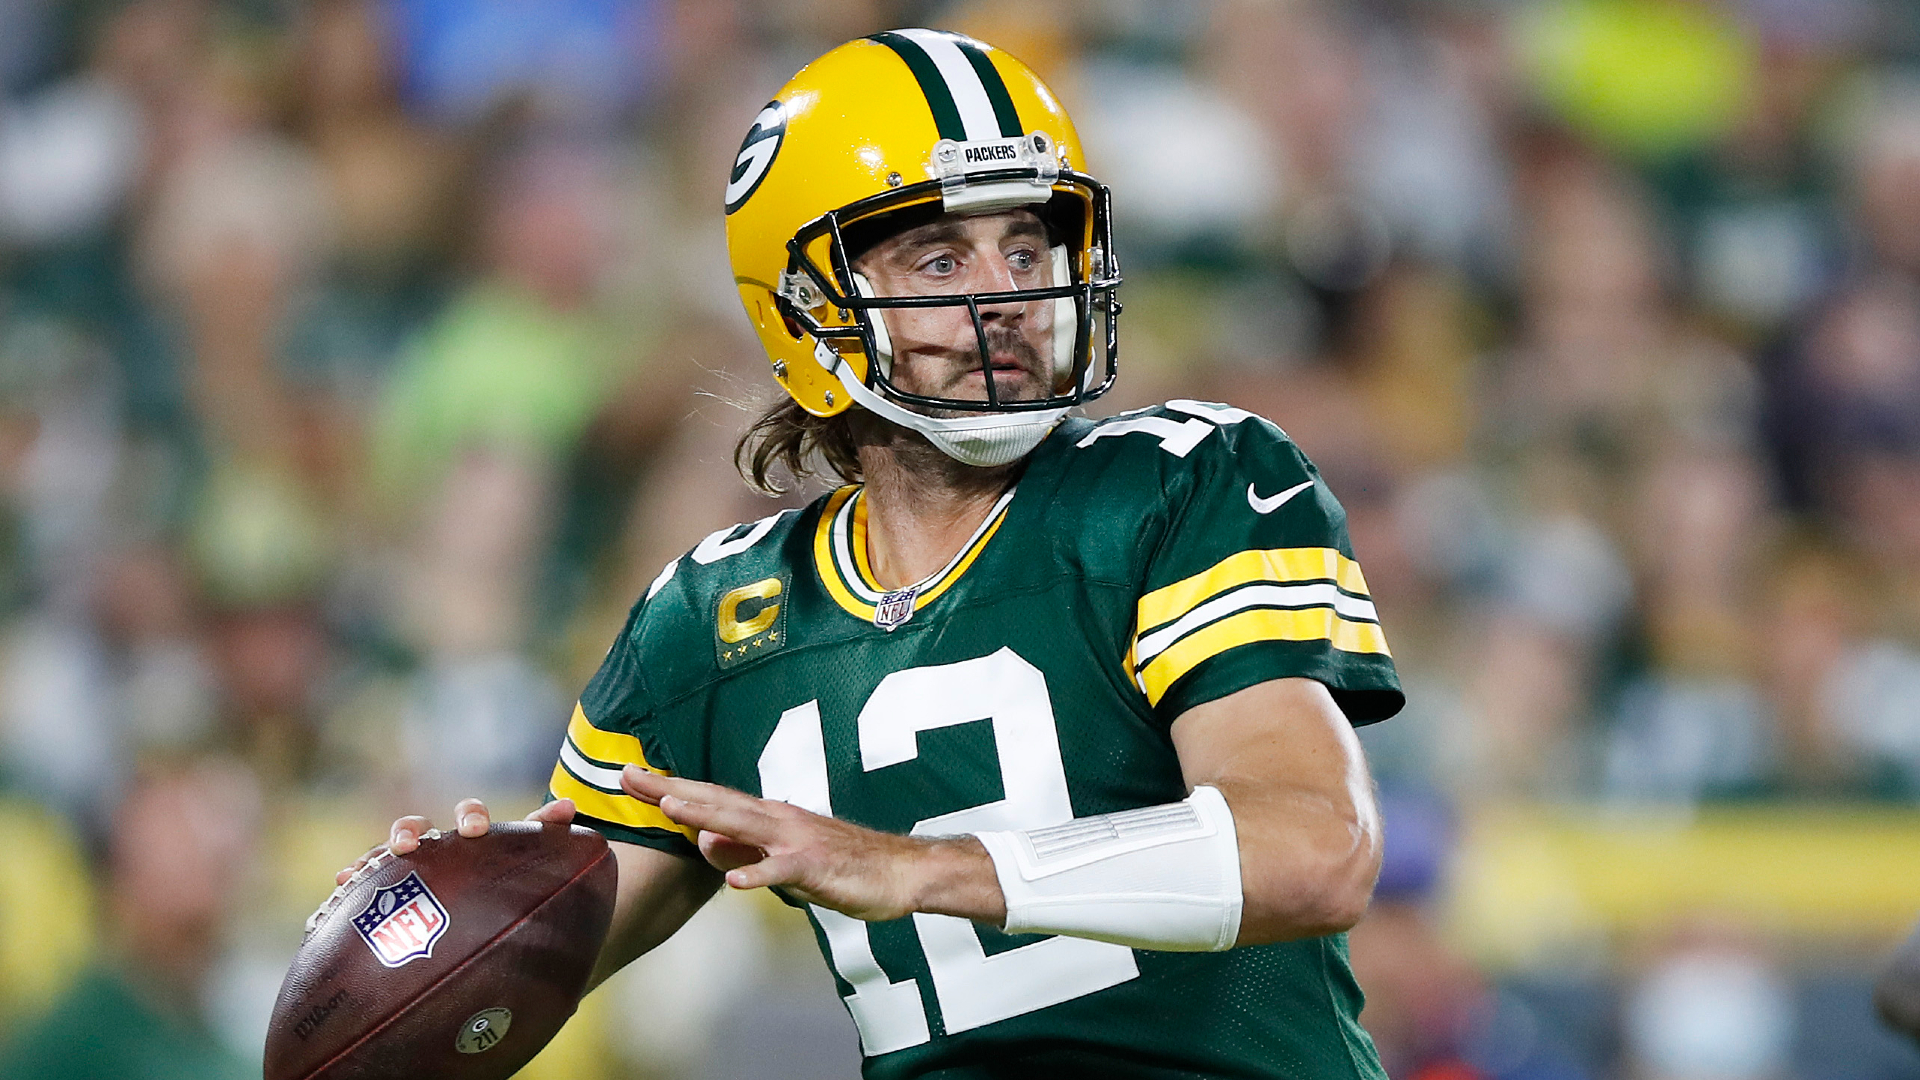 Howard Stern blasts Aaron Rodgers for COVID-19 stance: 'They should throw him out of the league'